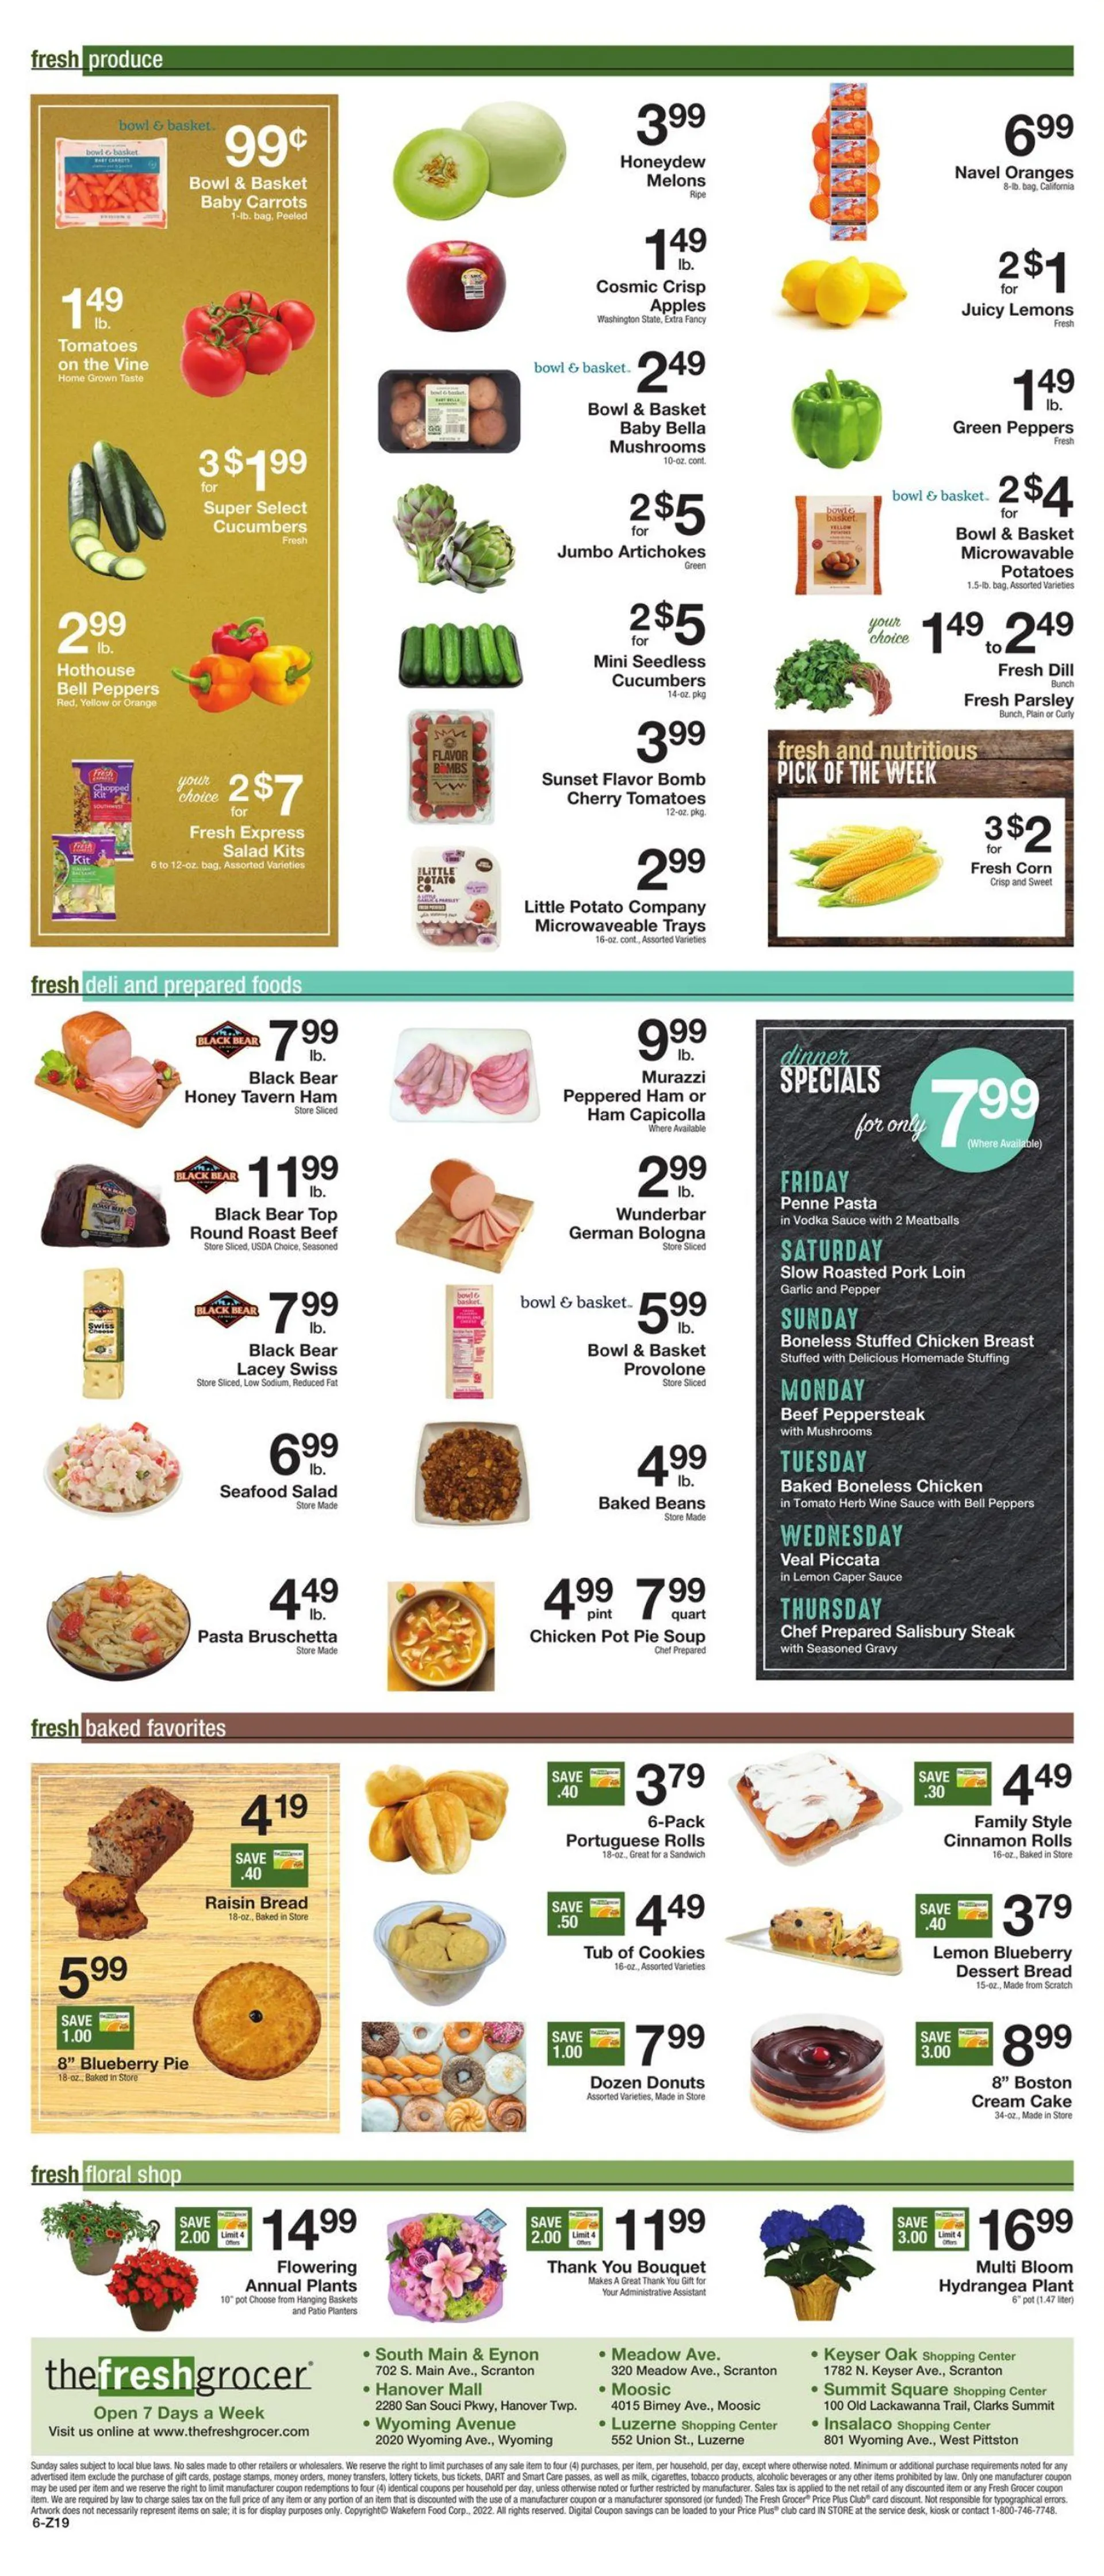 Gerritys Supermarkets Current weekly ad - 6